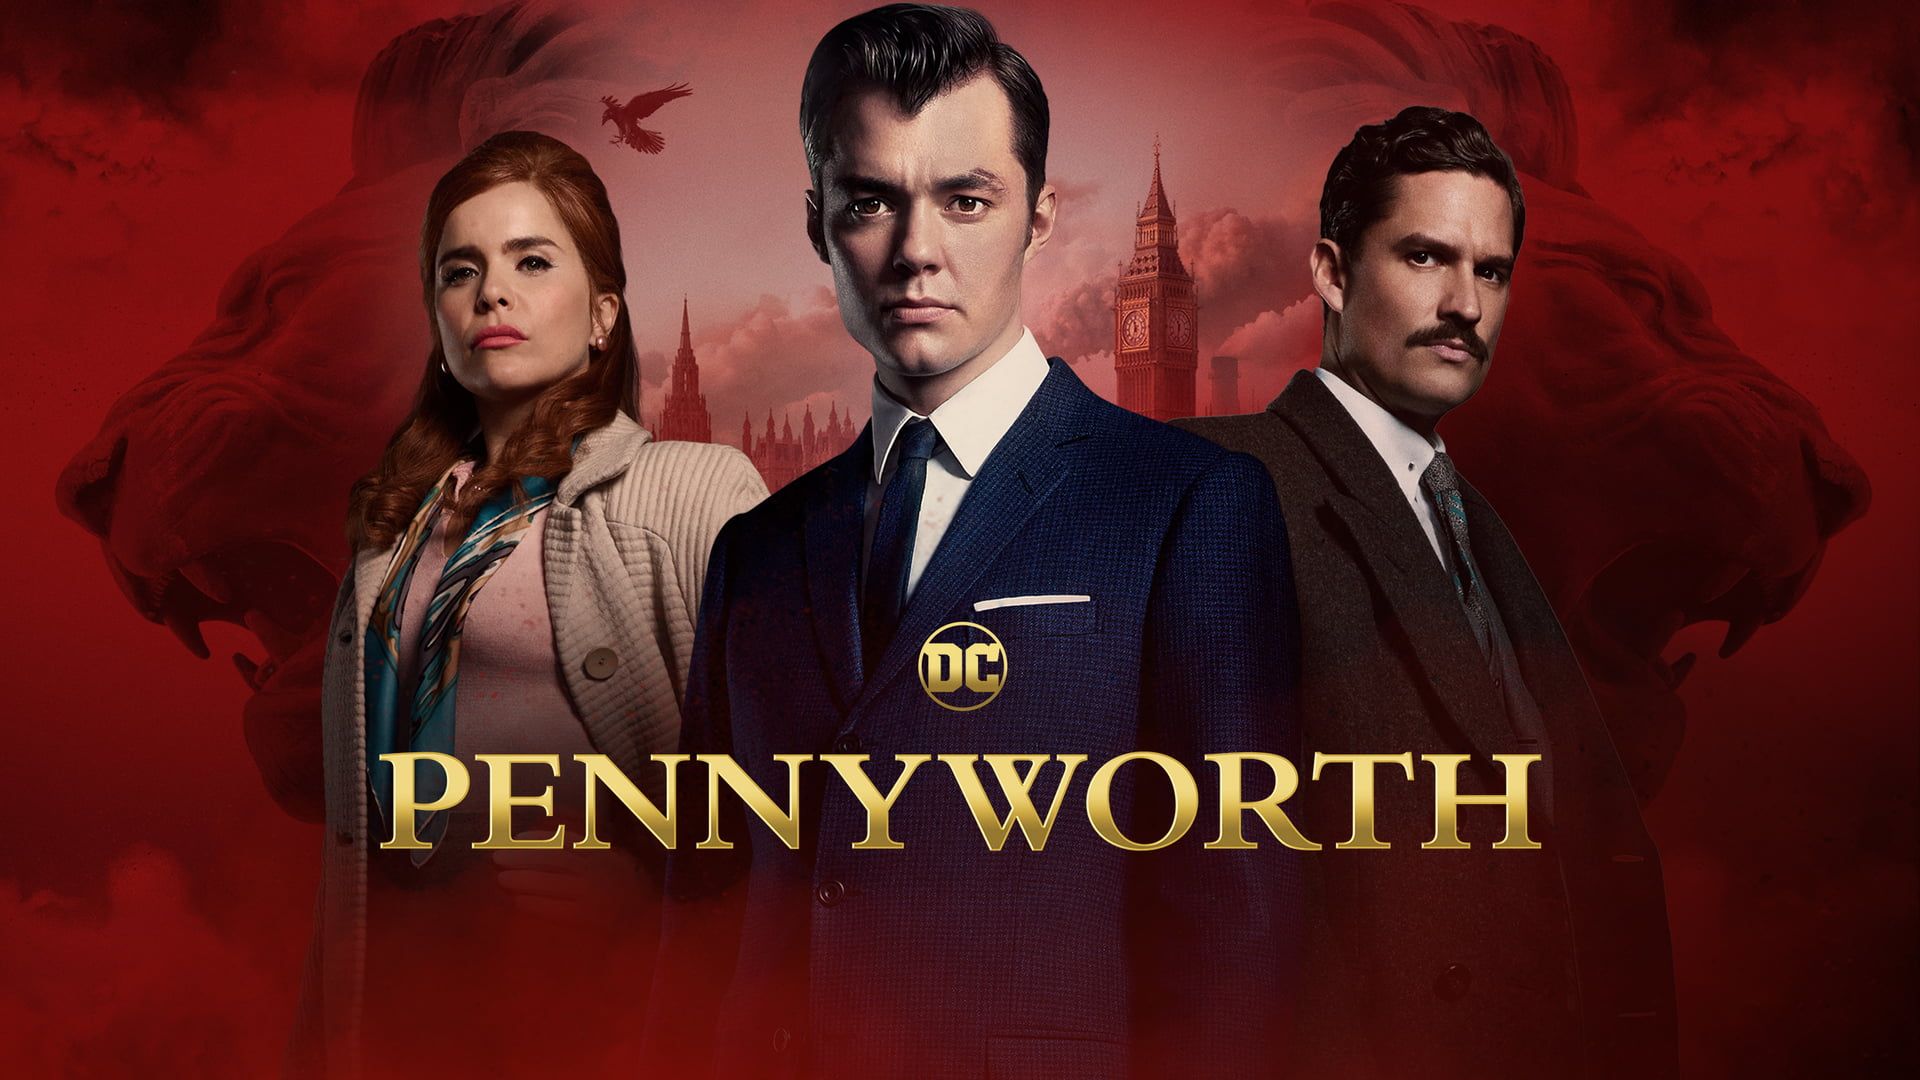 Pennyworth: Season 3 Will Release on HBO Max in 2022